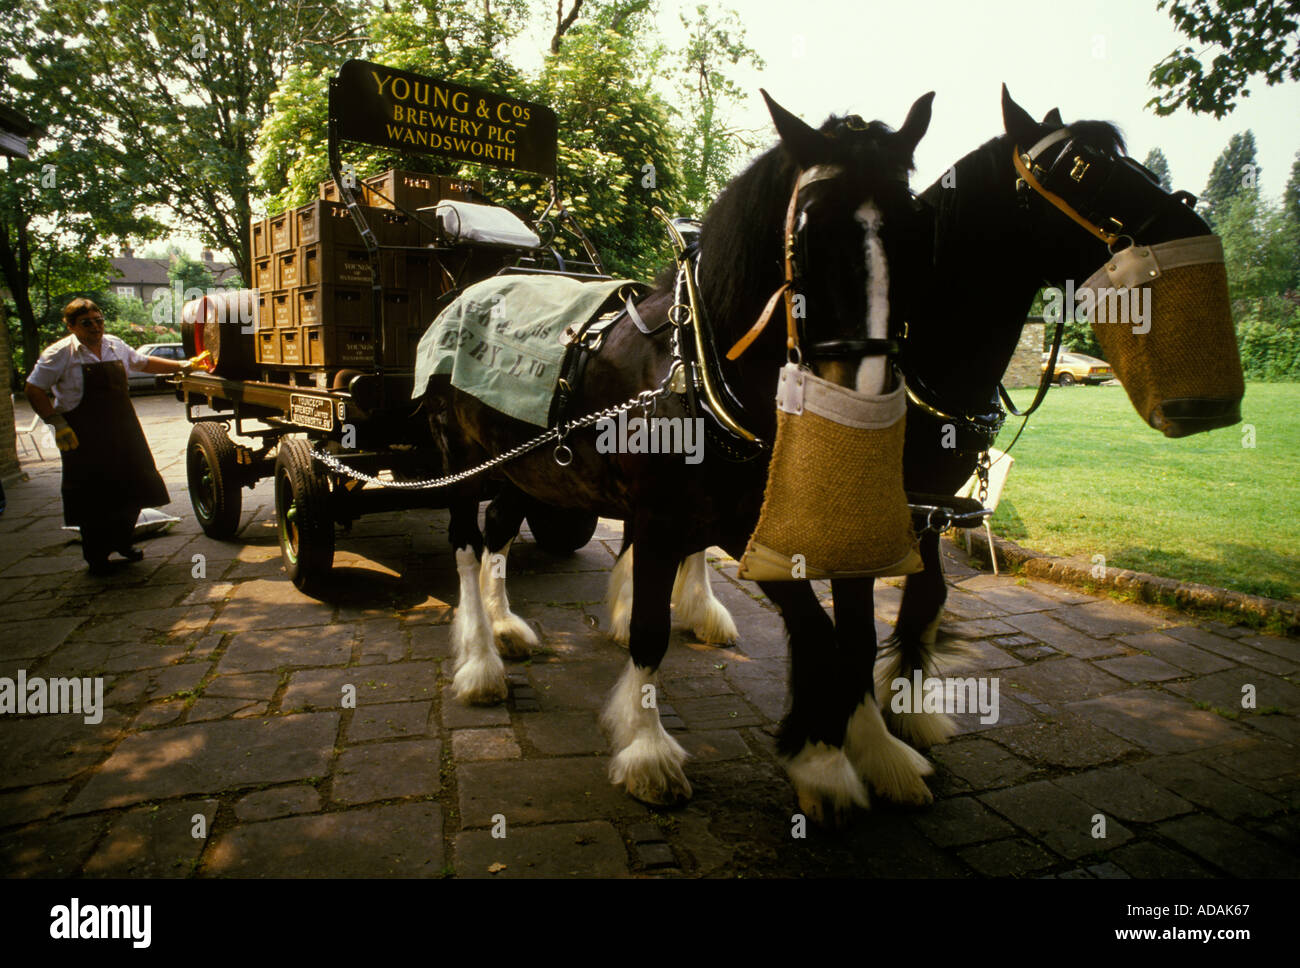 Youngs Brewery horses Wandsworth South London .Traditional delivery of beer to local public houses by horse and cart. England 1980s circa 1985 UK Stock Photo